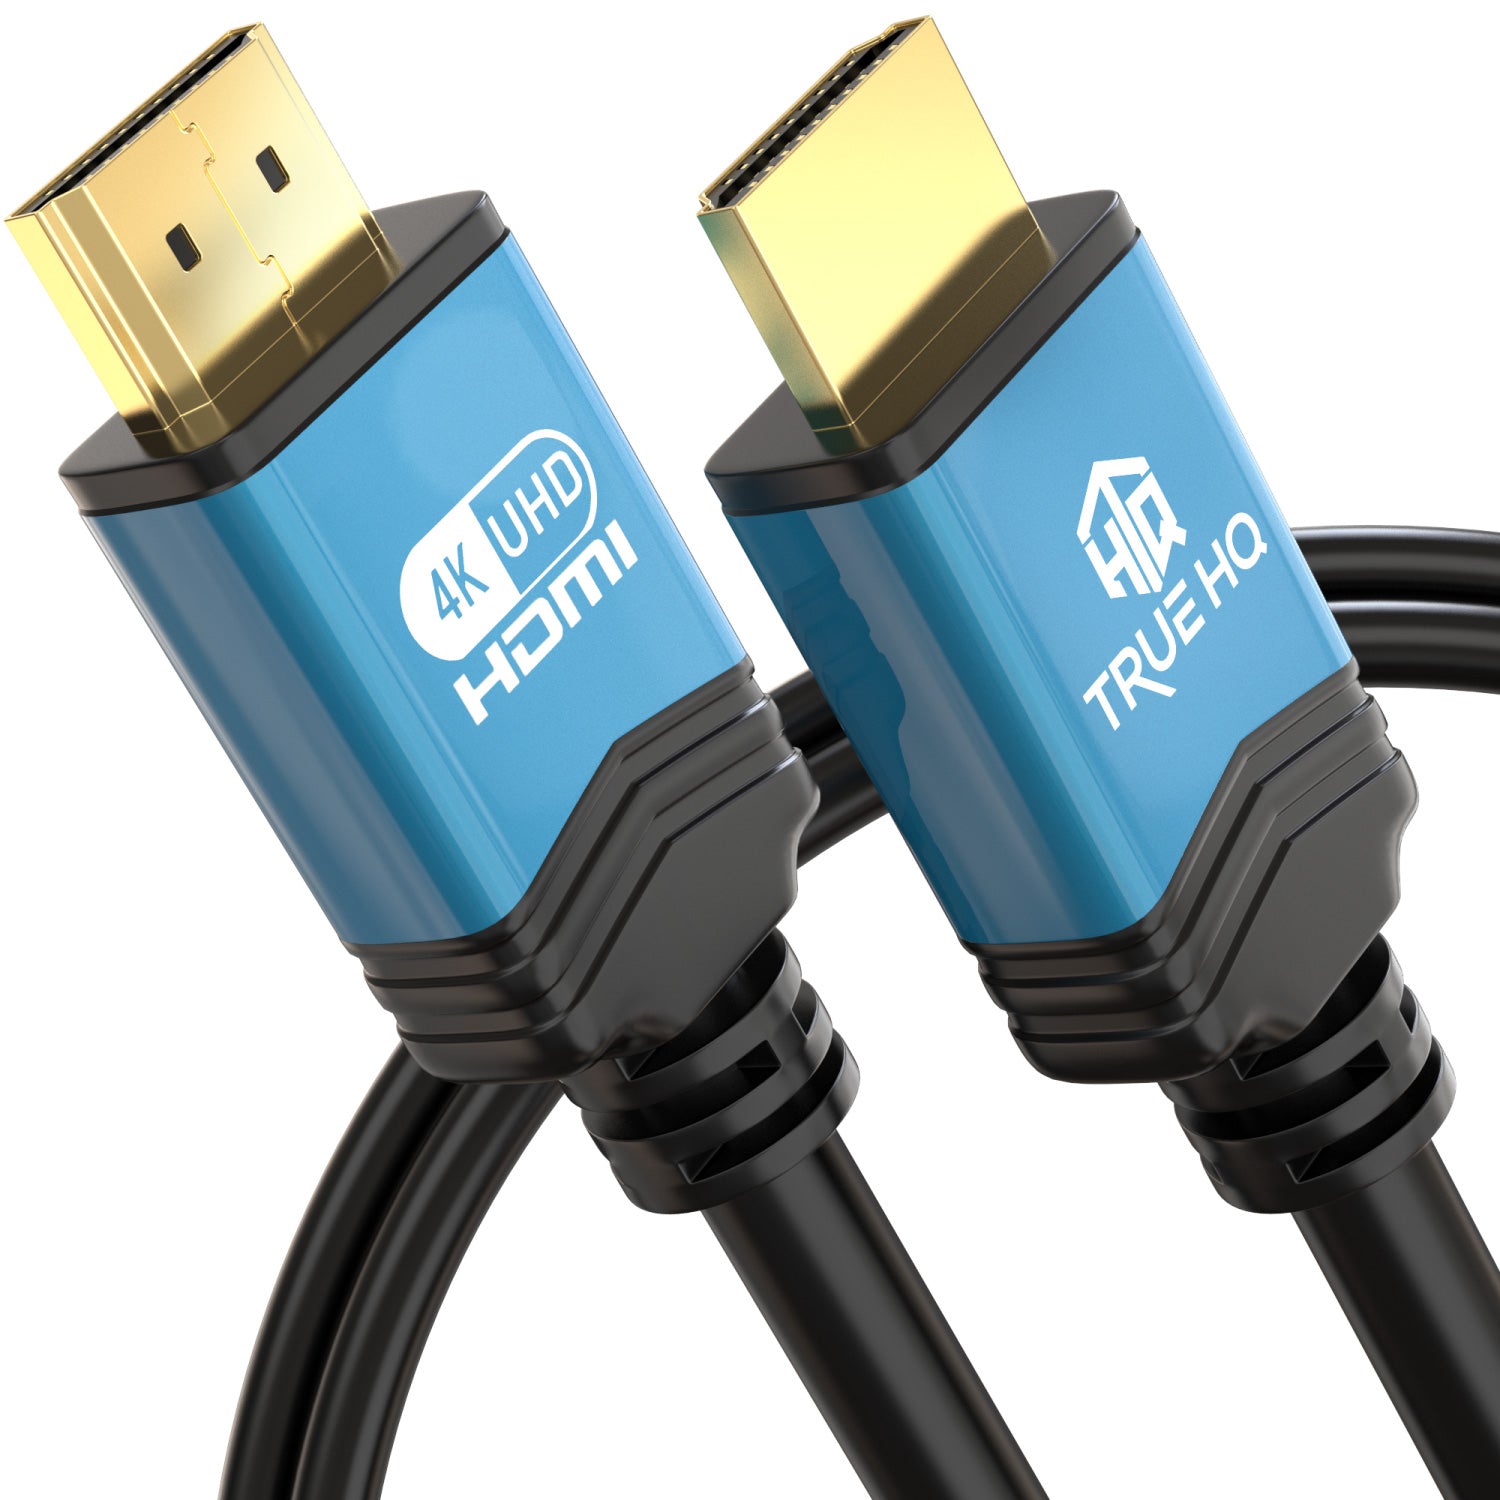 HDMI TO HDMI Cable - Flexible - 5M